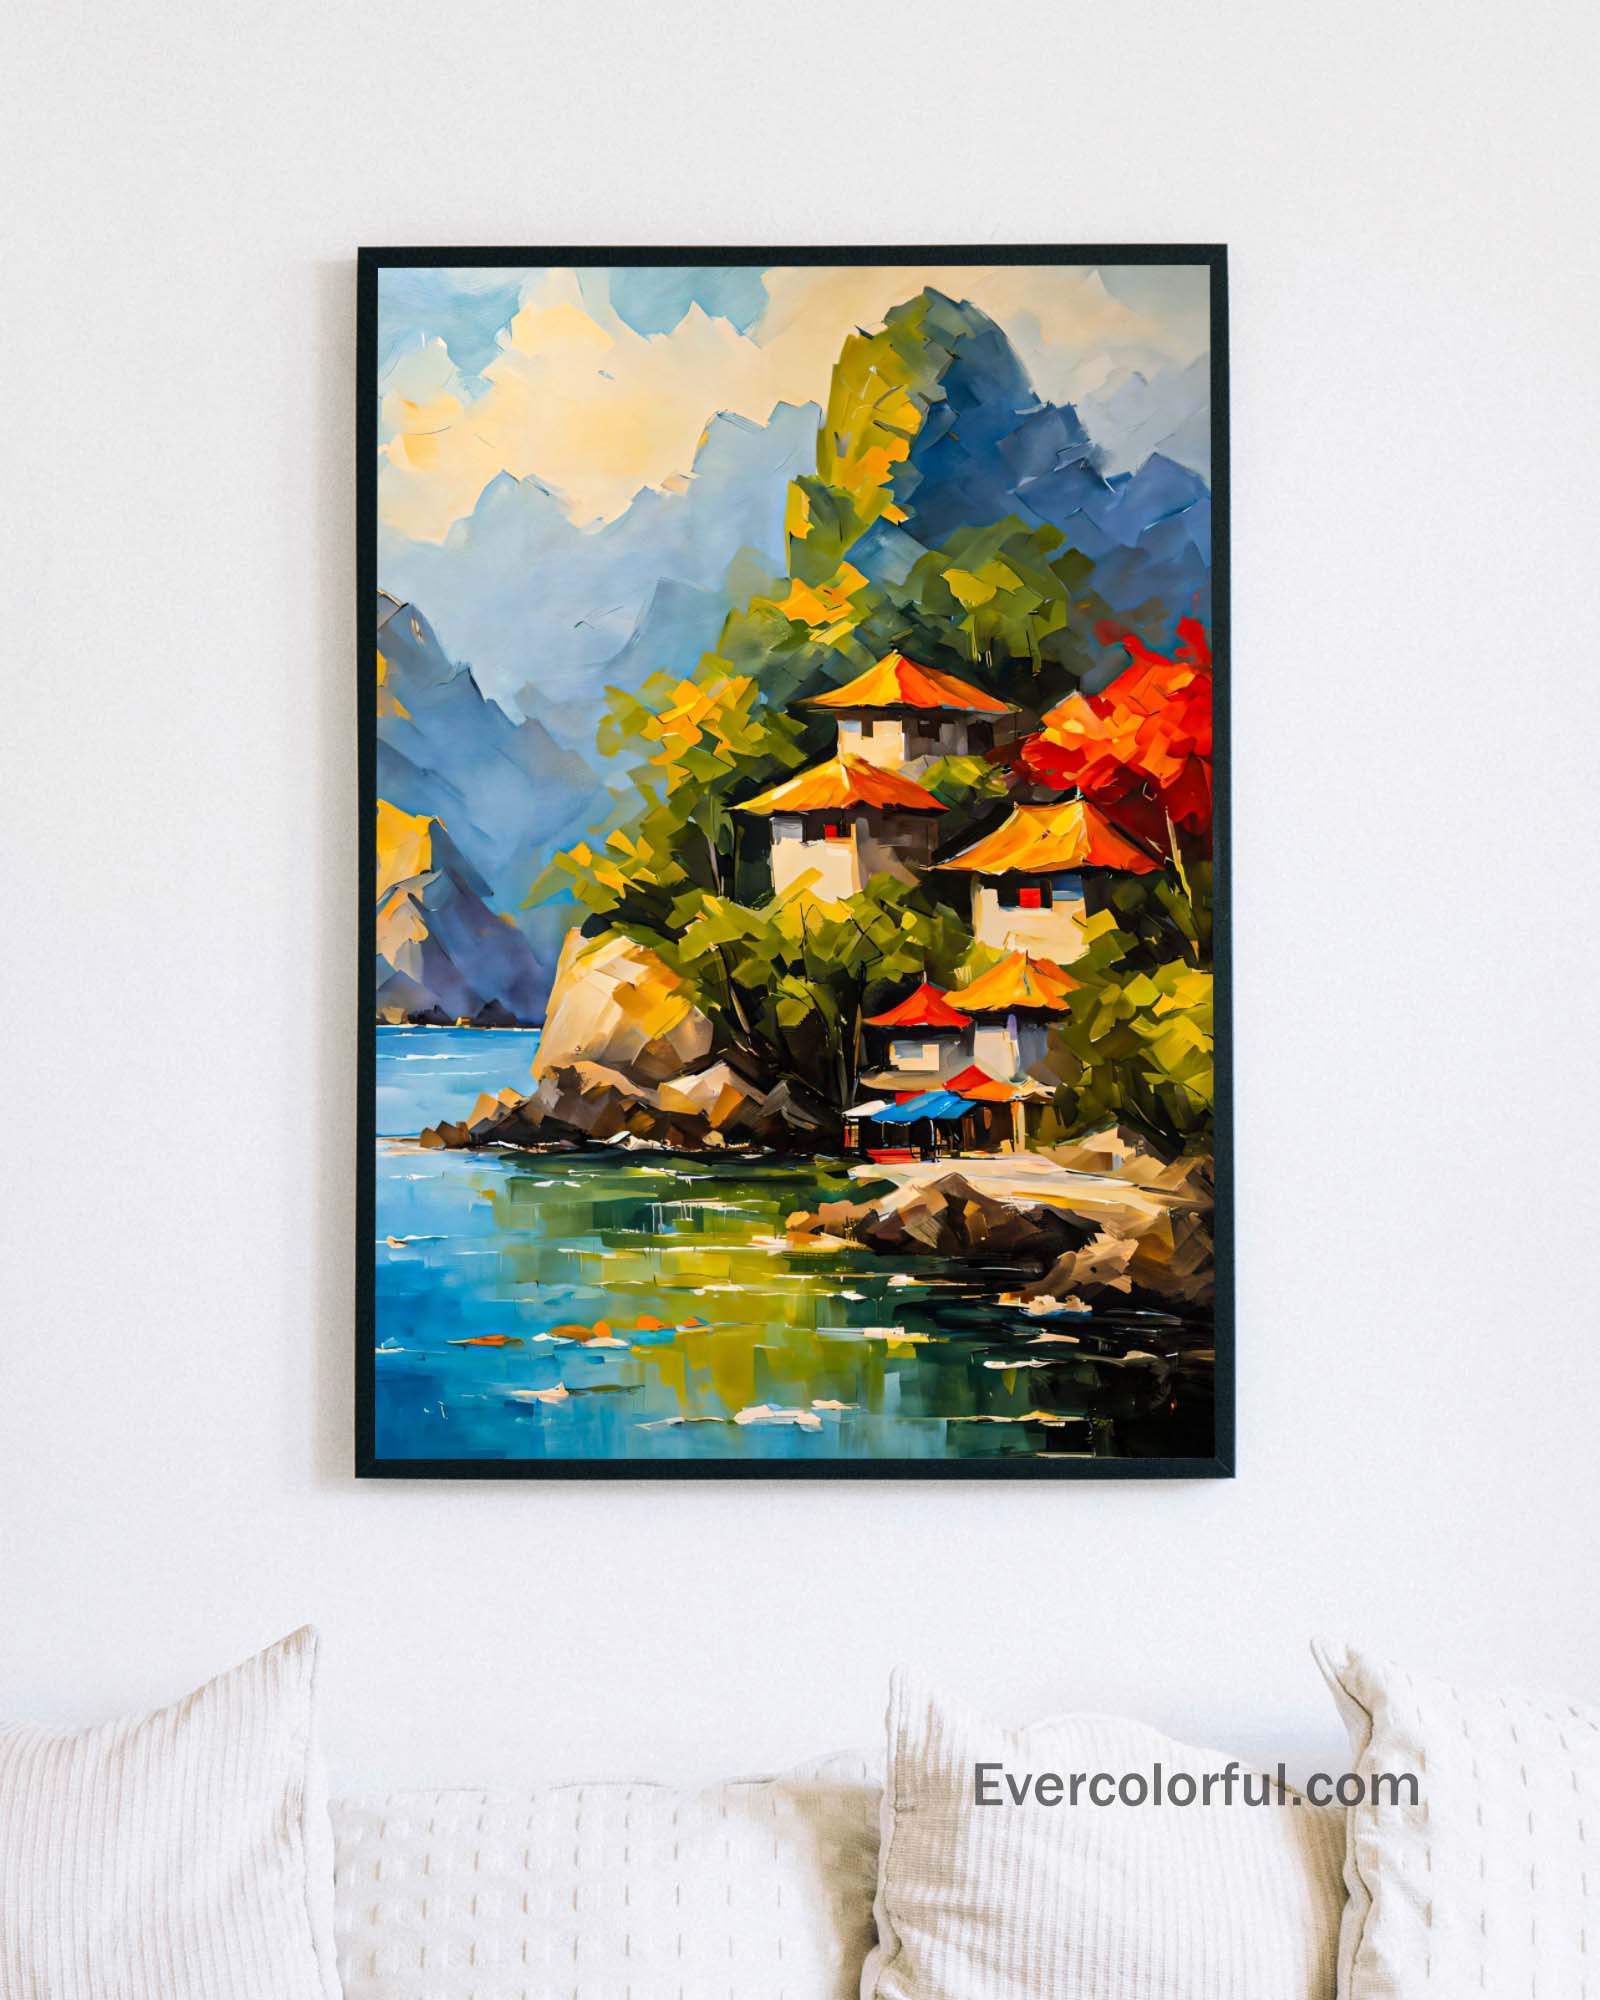 Soothing refuge - Poster - Ever colorful